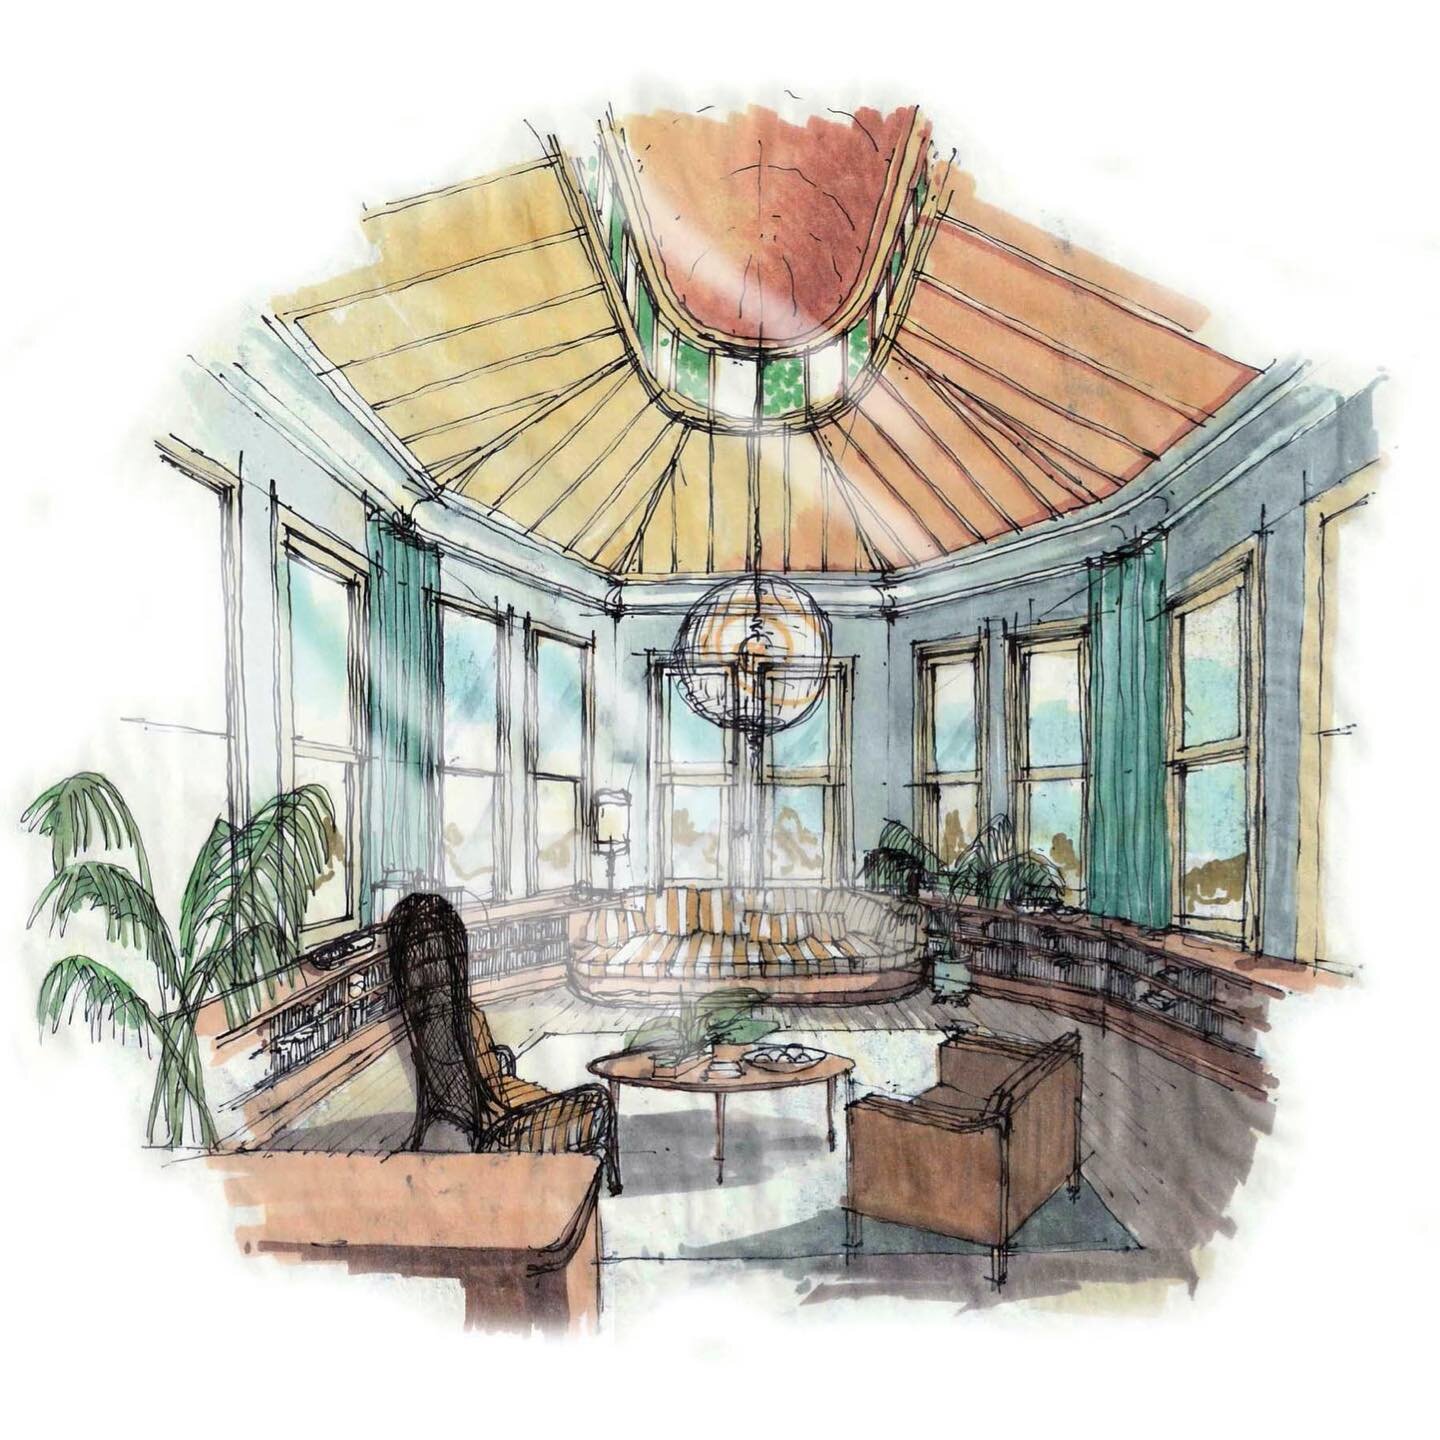 Under construction - the substantial renovation of a grand Herne Bay villa. The architects @pacstudio and clients are committed to creating something unique and beautifully crafted. 

Concept sketch by @pacstudio